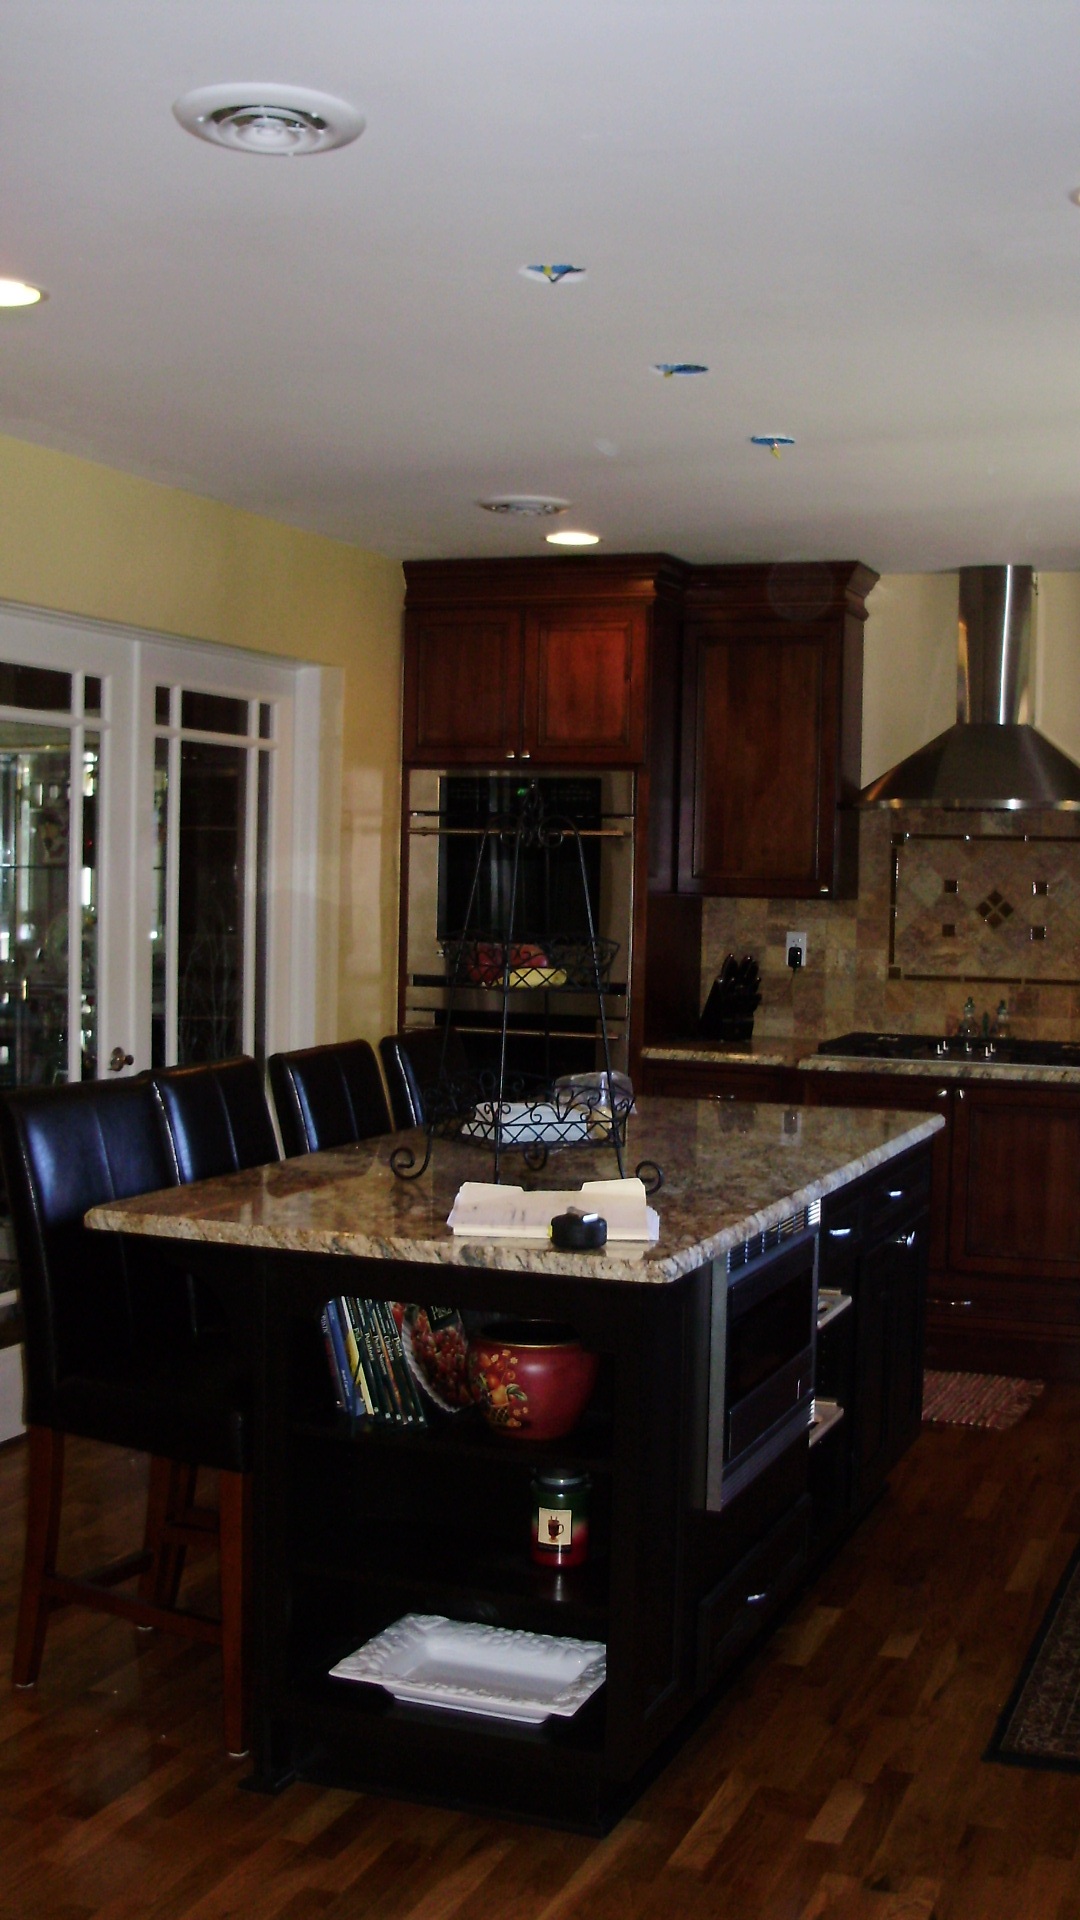 Another Happy KITCHEN Customer-October 31 2008